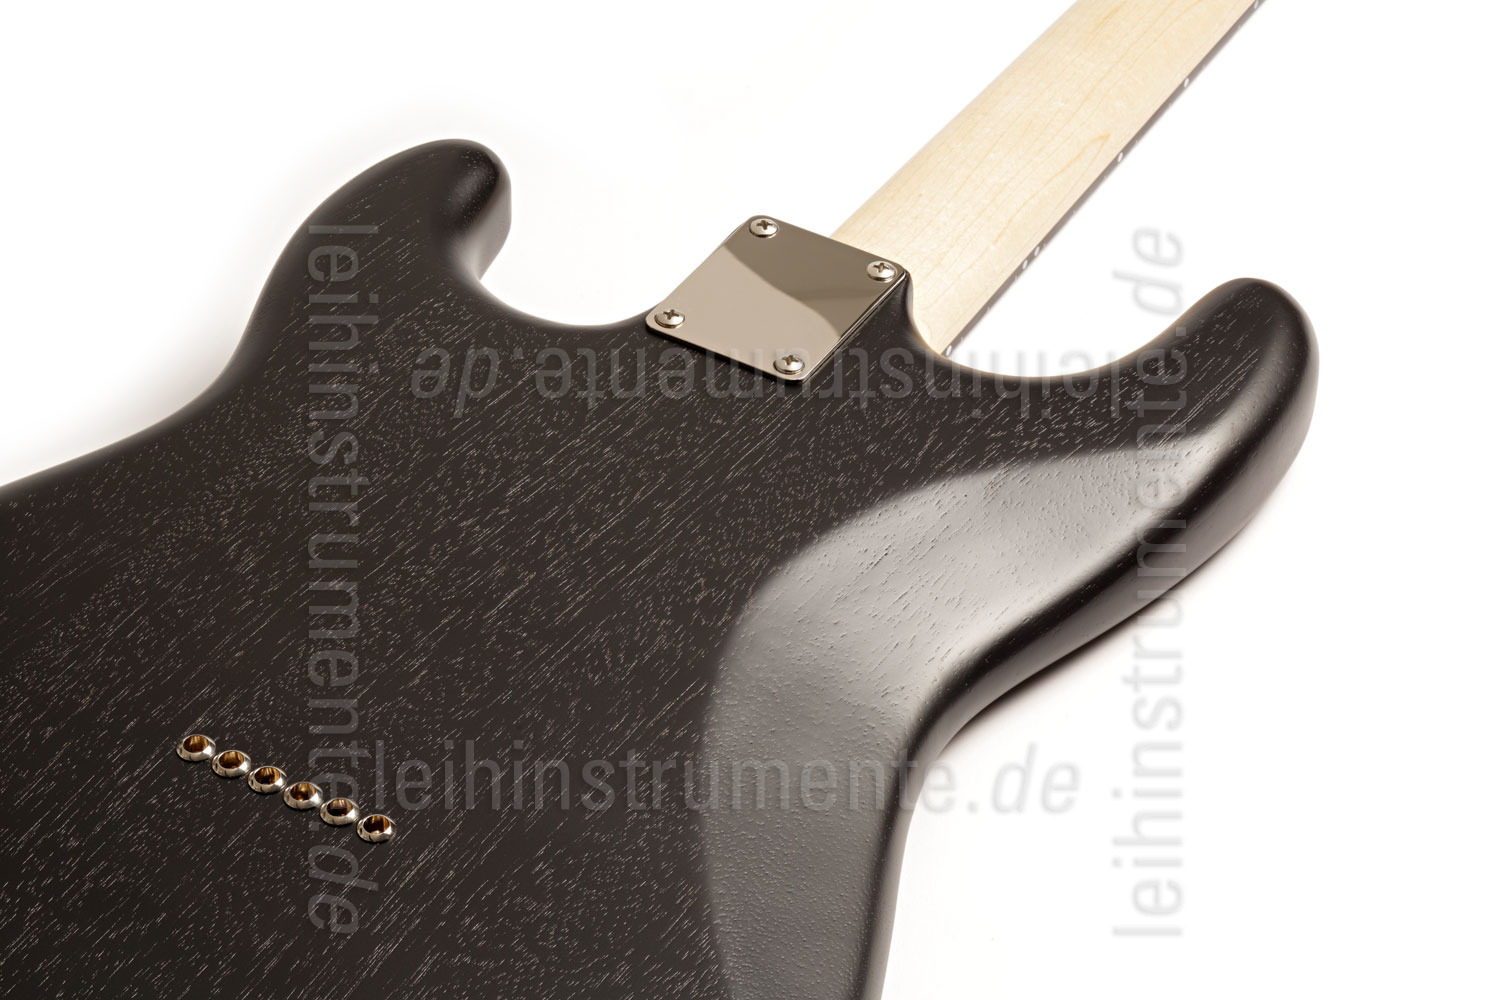 to article description / price Electric Guitar BERSTECHER Deluxe - Black / Floral Black + hard case - made in Germany